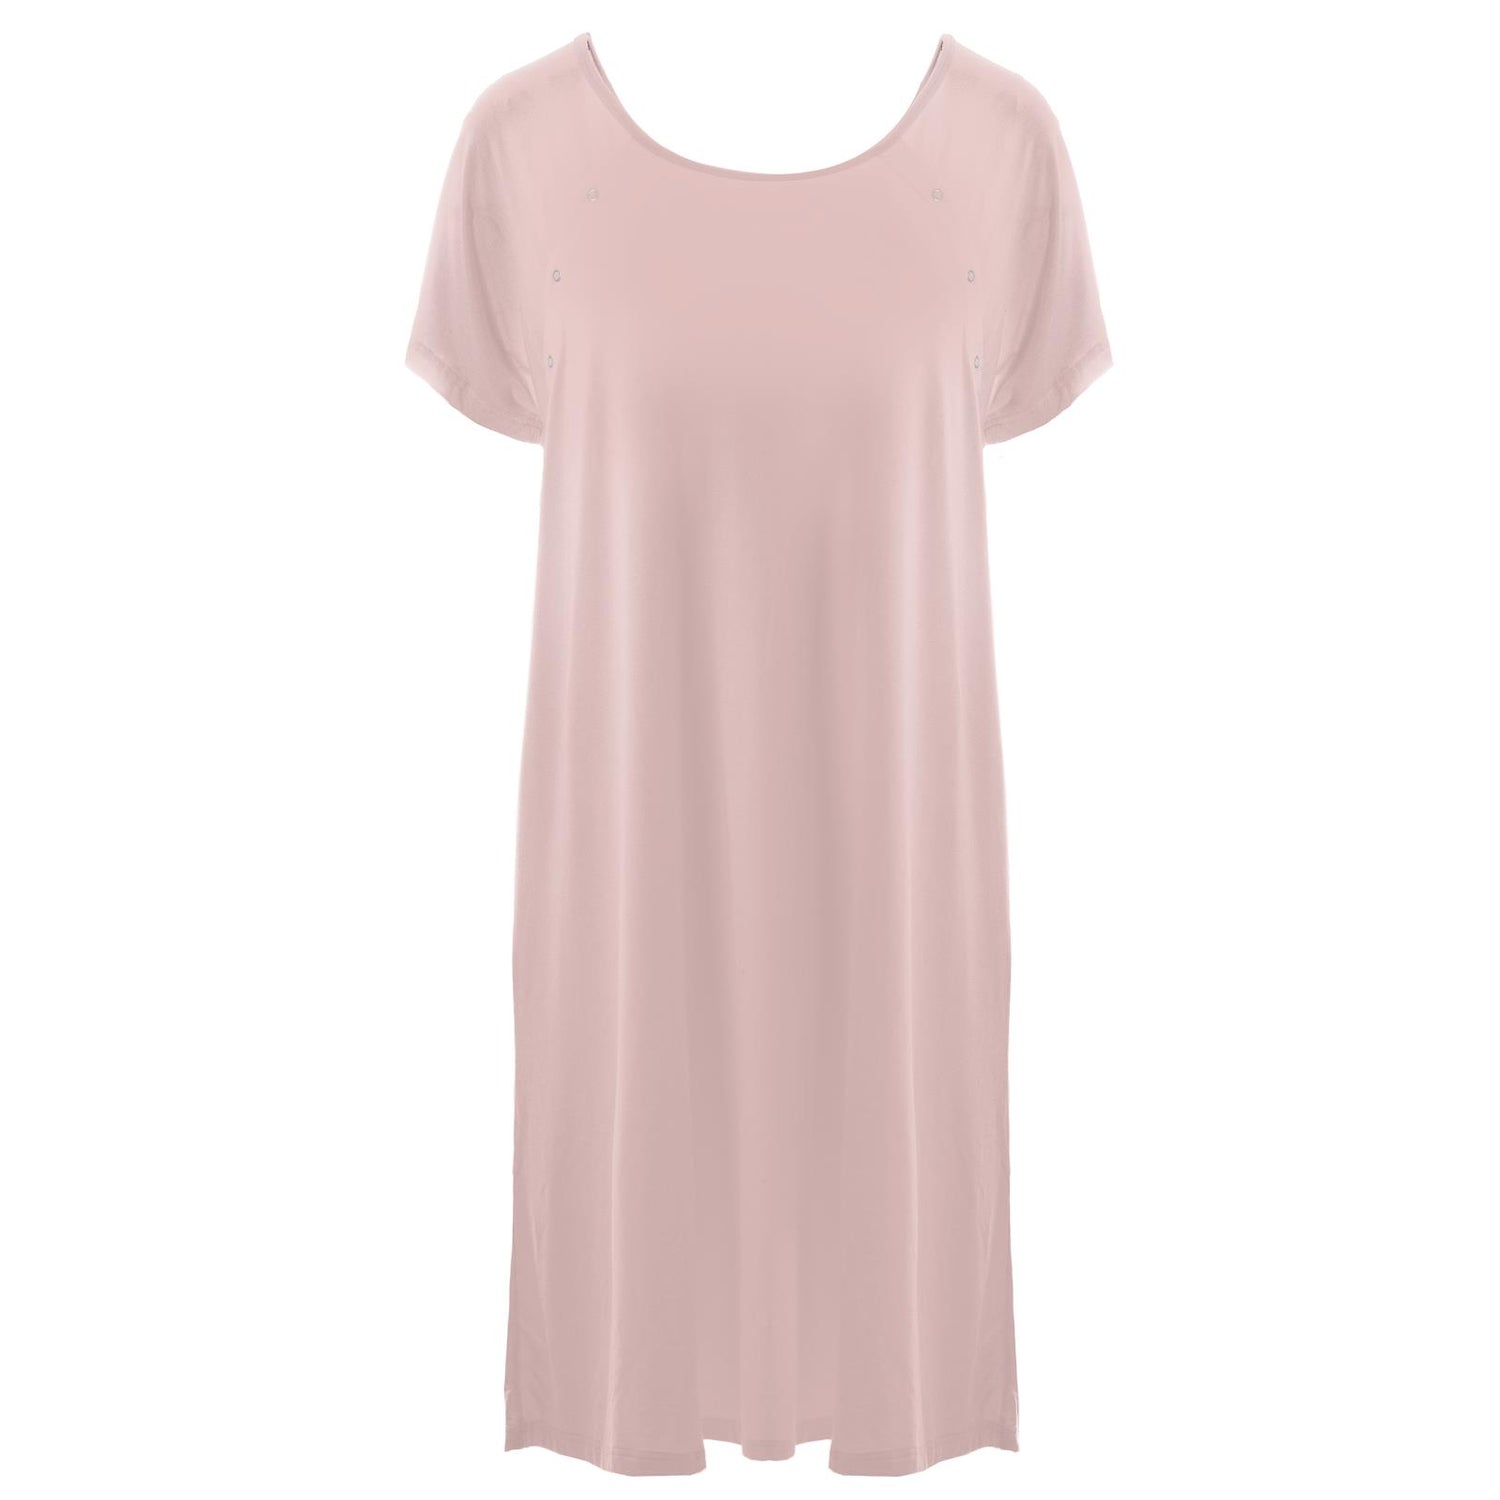 Women's Hospital Gown in Baby Rose